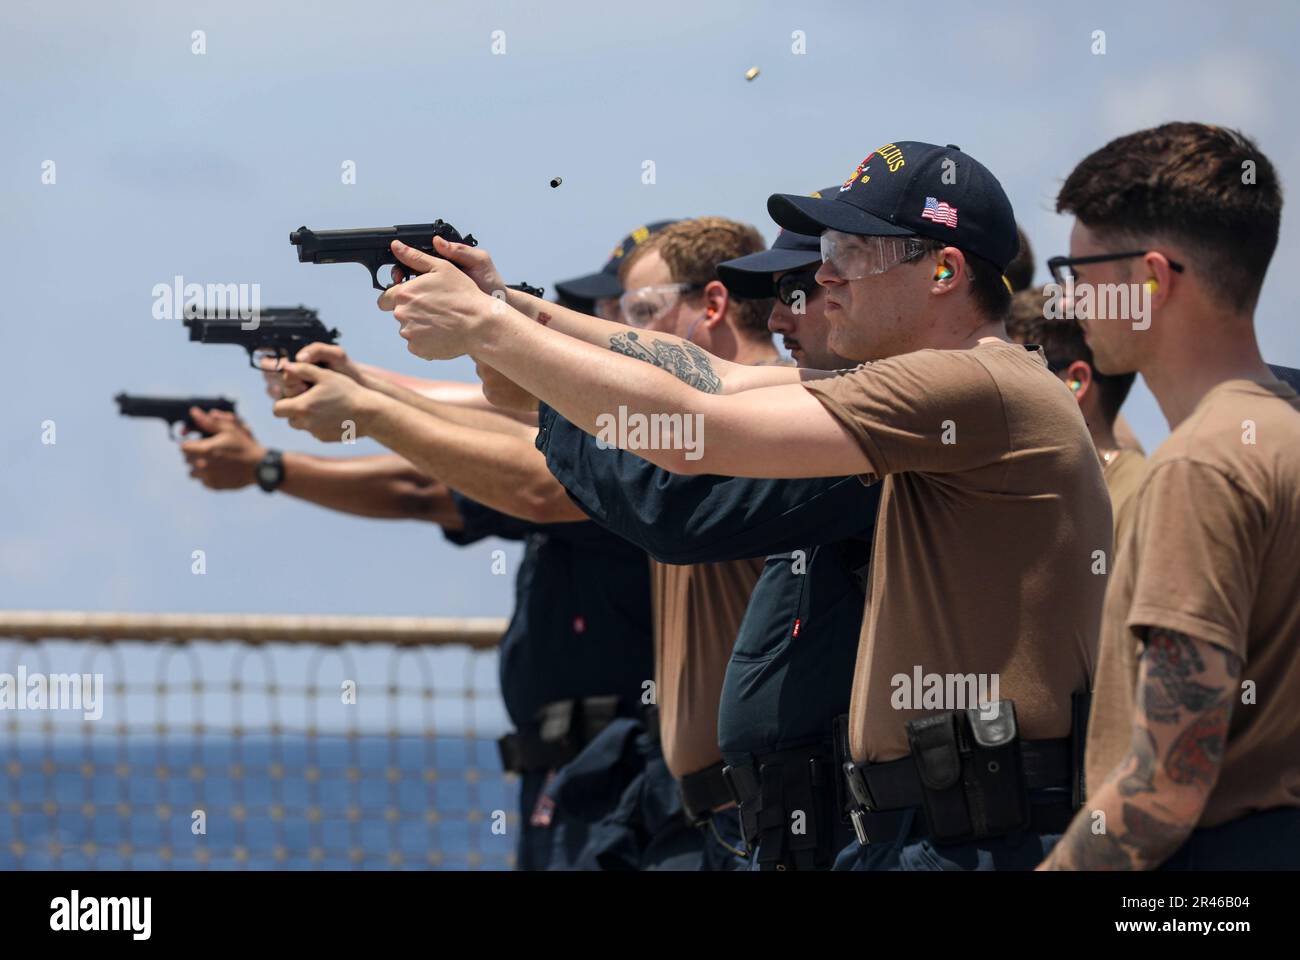 SOUTH CHINA SEA (March 27, 2023) – Sailors assigned to the Arleigh Burke-class guided-missile destroyer USS Milius (DDG 69) fire 9 mm pistols during a live-fire exercise while operating in the South China Sea, March 27. Milius is assigned to Commander, Task Force 71/Destroyer Squadron (DESRON) 15, the Navy’s largest forward-deployed DESRON and the U.S. 7th Fleet’s principal surface force. Stock Photo